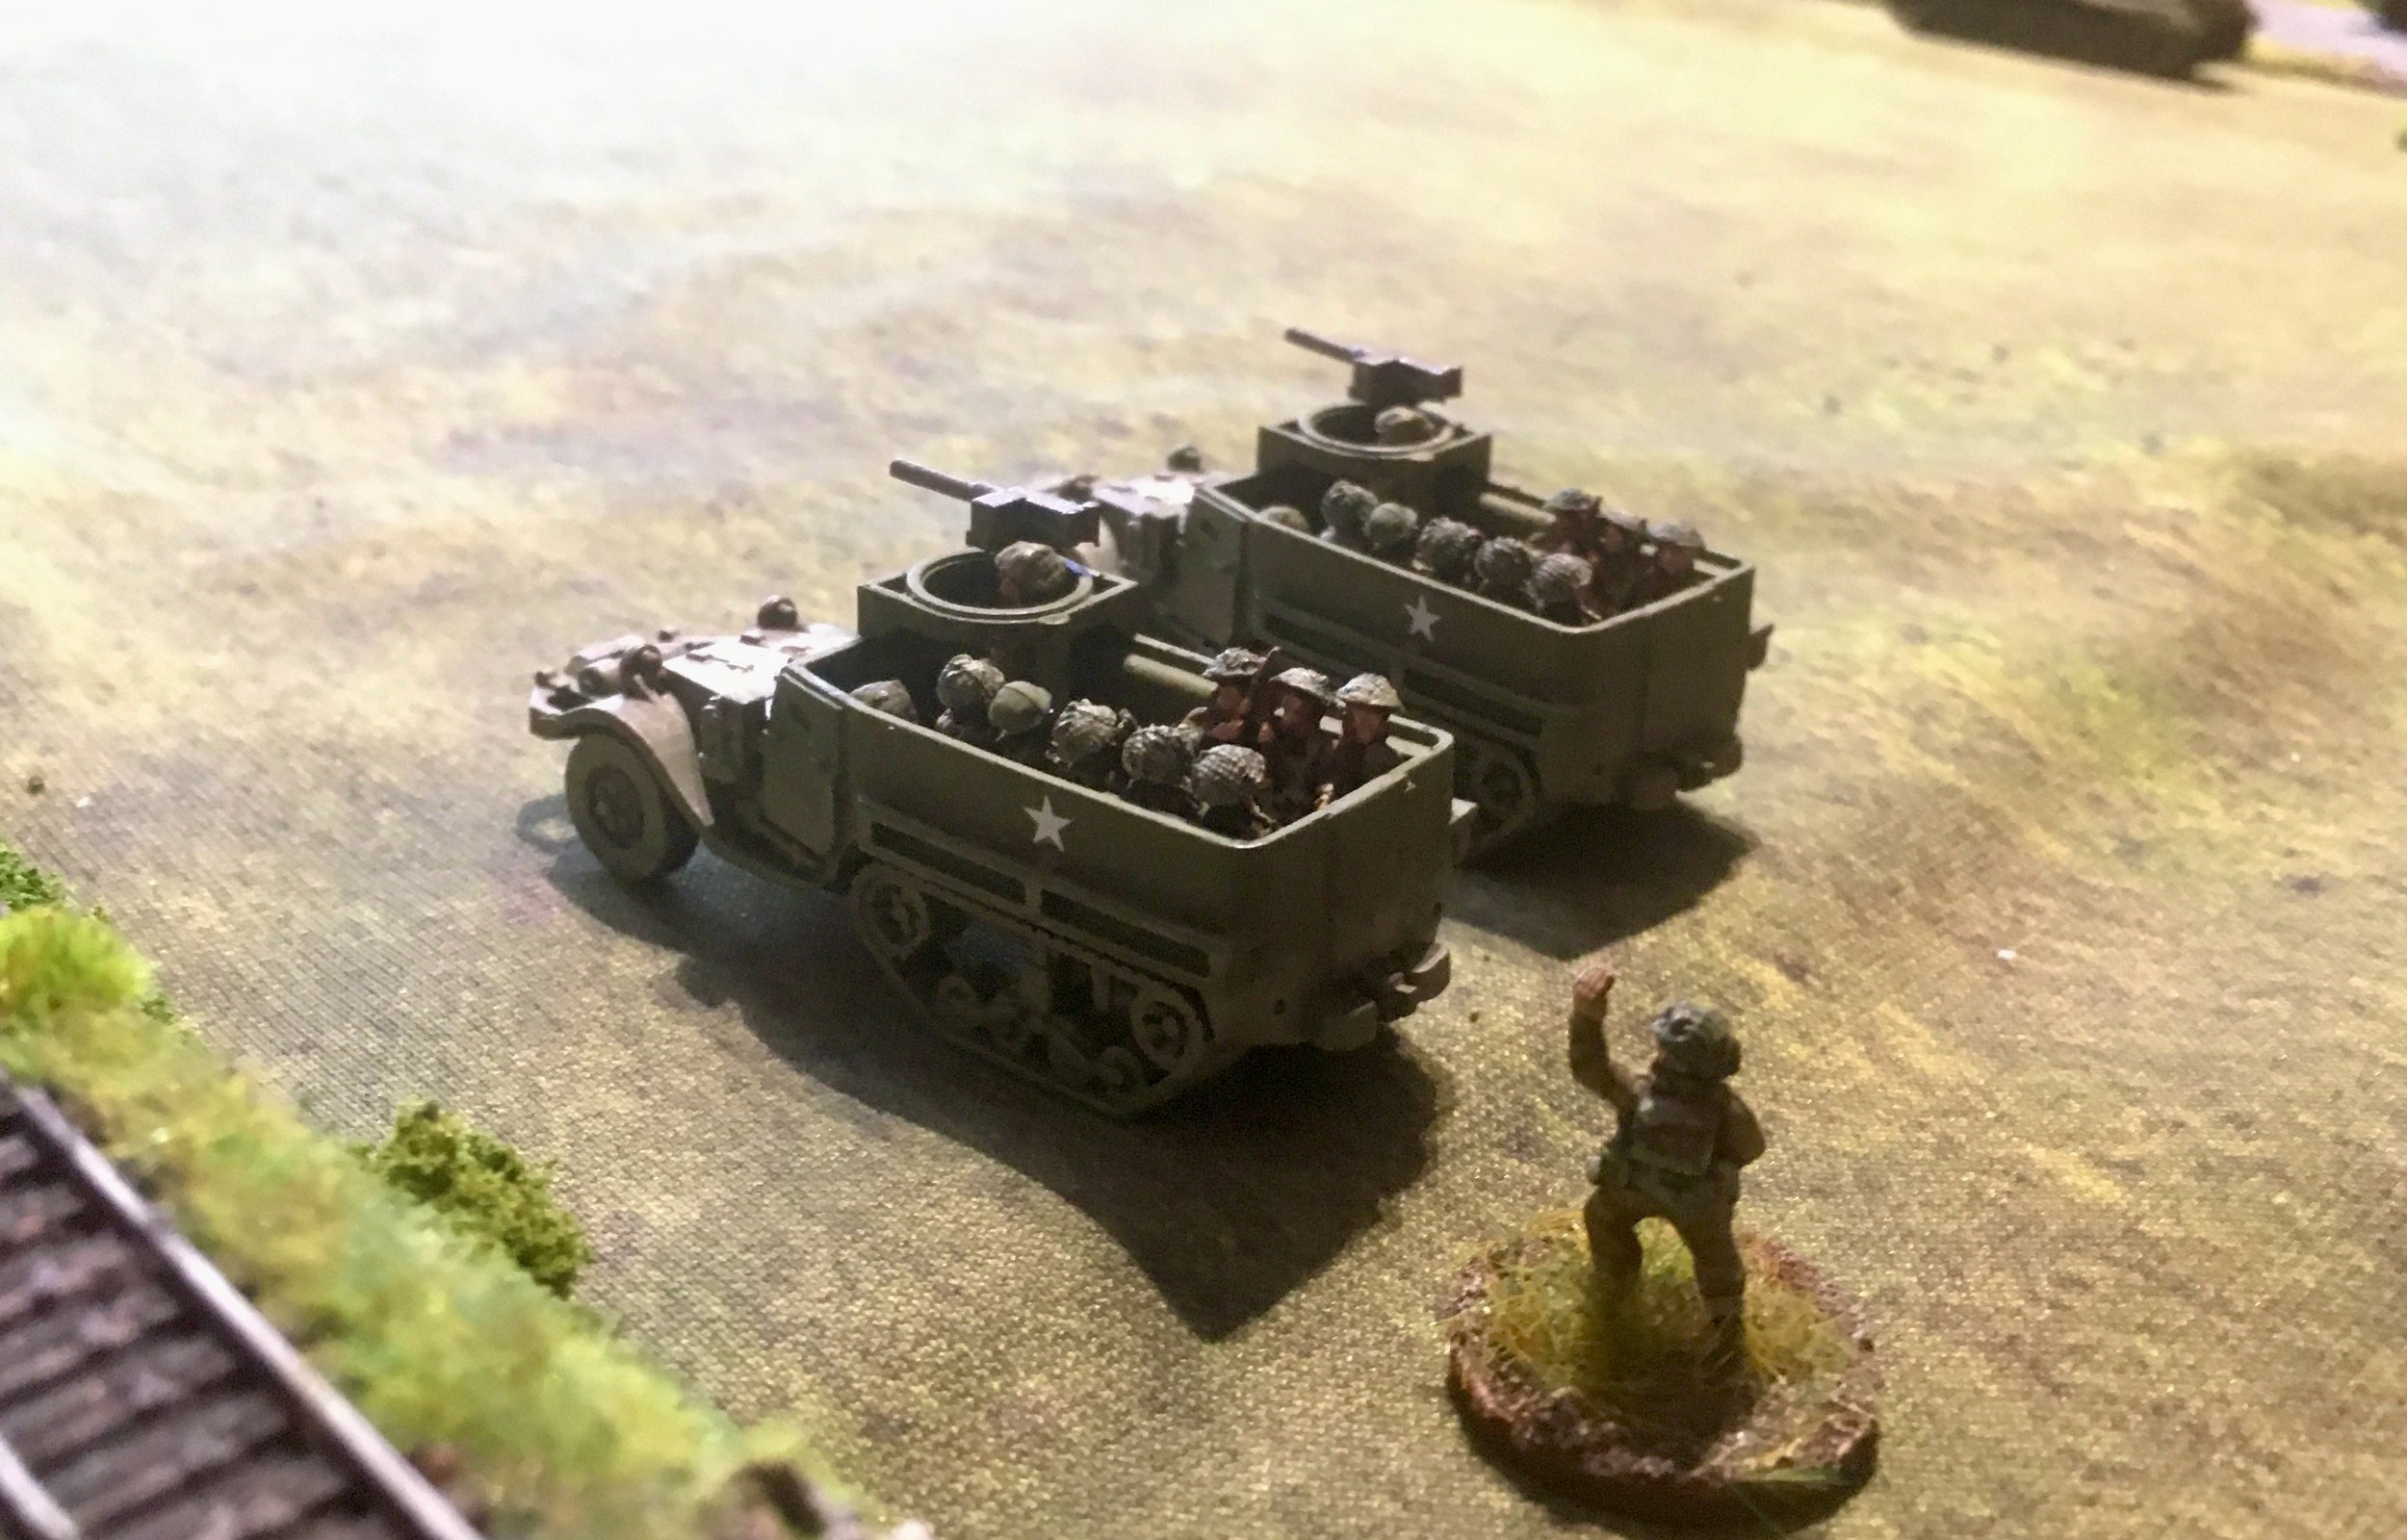 Followed by two M5 half-tracks of the Grenadier Guards in support...